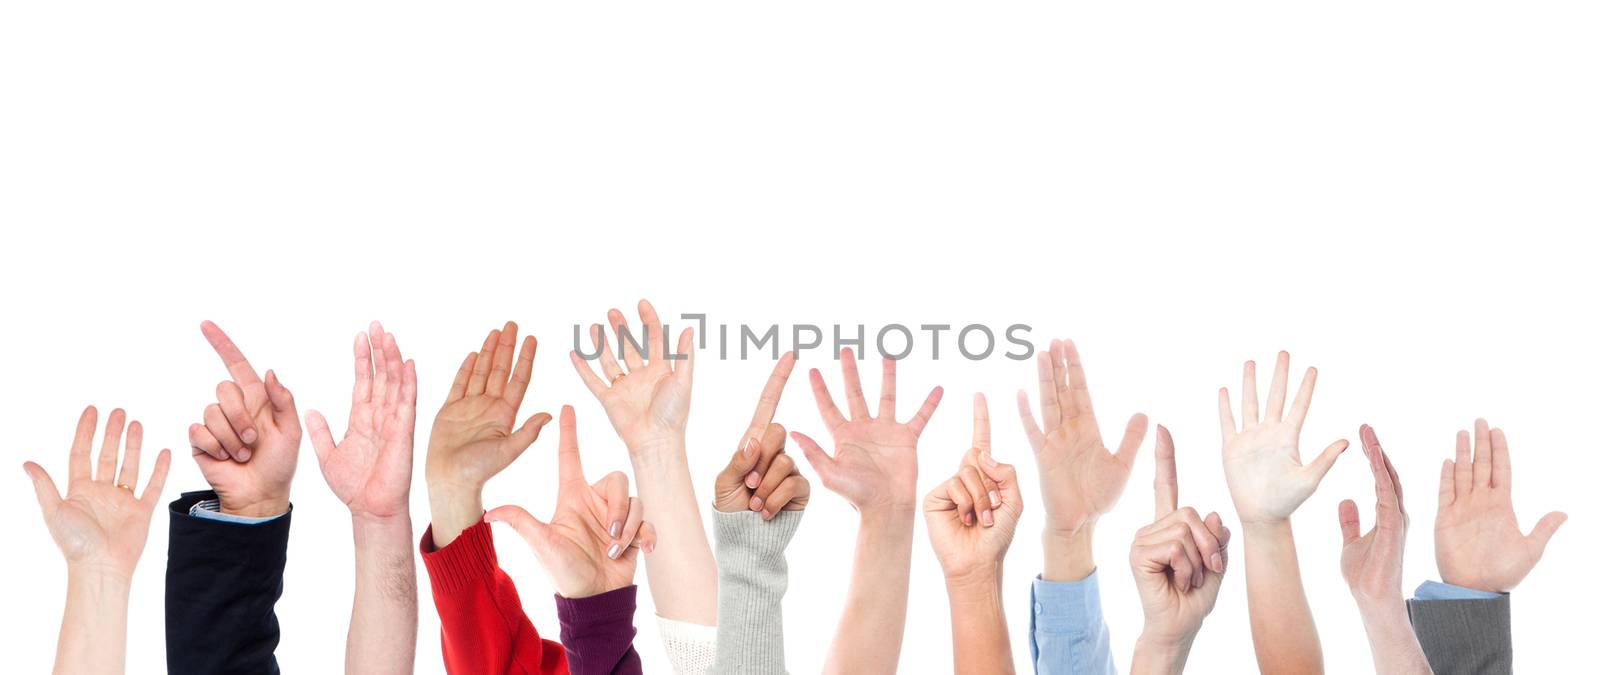 Hands raised up. Isolated over white background